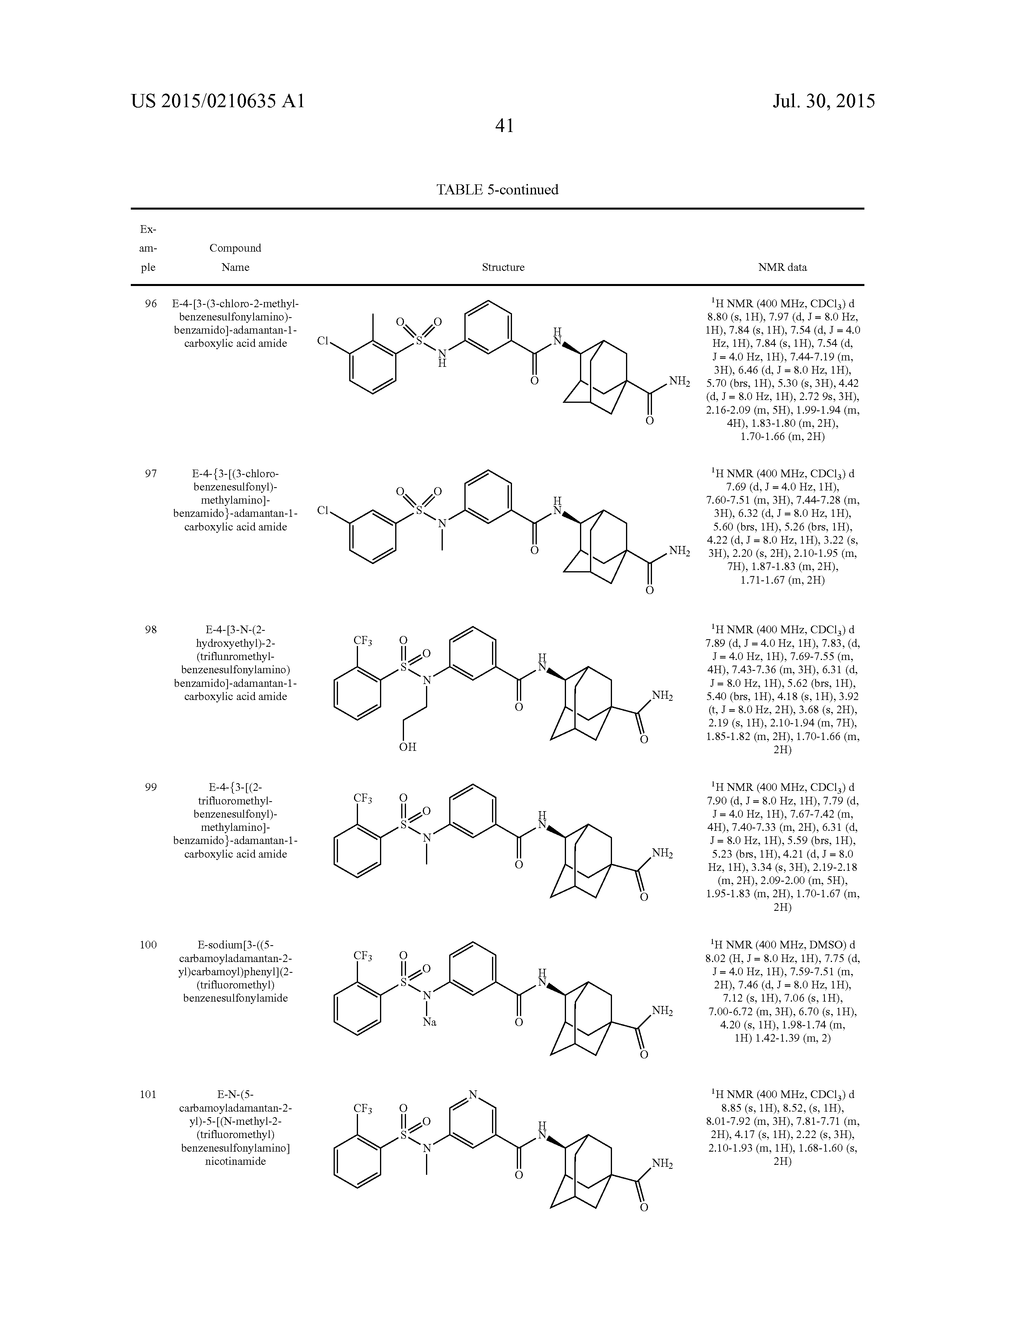 NOVEL COMPOUND HAVING ABILITY TO INHIBIT 11B-HSD1 ENZYME OR     PHARMACEUTICALLY ACCEPTABLE SALT THEREOF, METHOD FOR PRODUCING SAME, AND     PHARMACEUTICAL COMPOSITION CONTAINING SAME AS ACTIVE INGREDIENT - diagram, schematic, and image 42